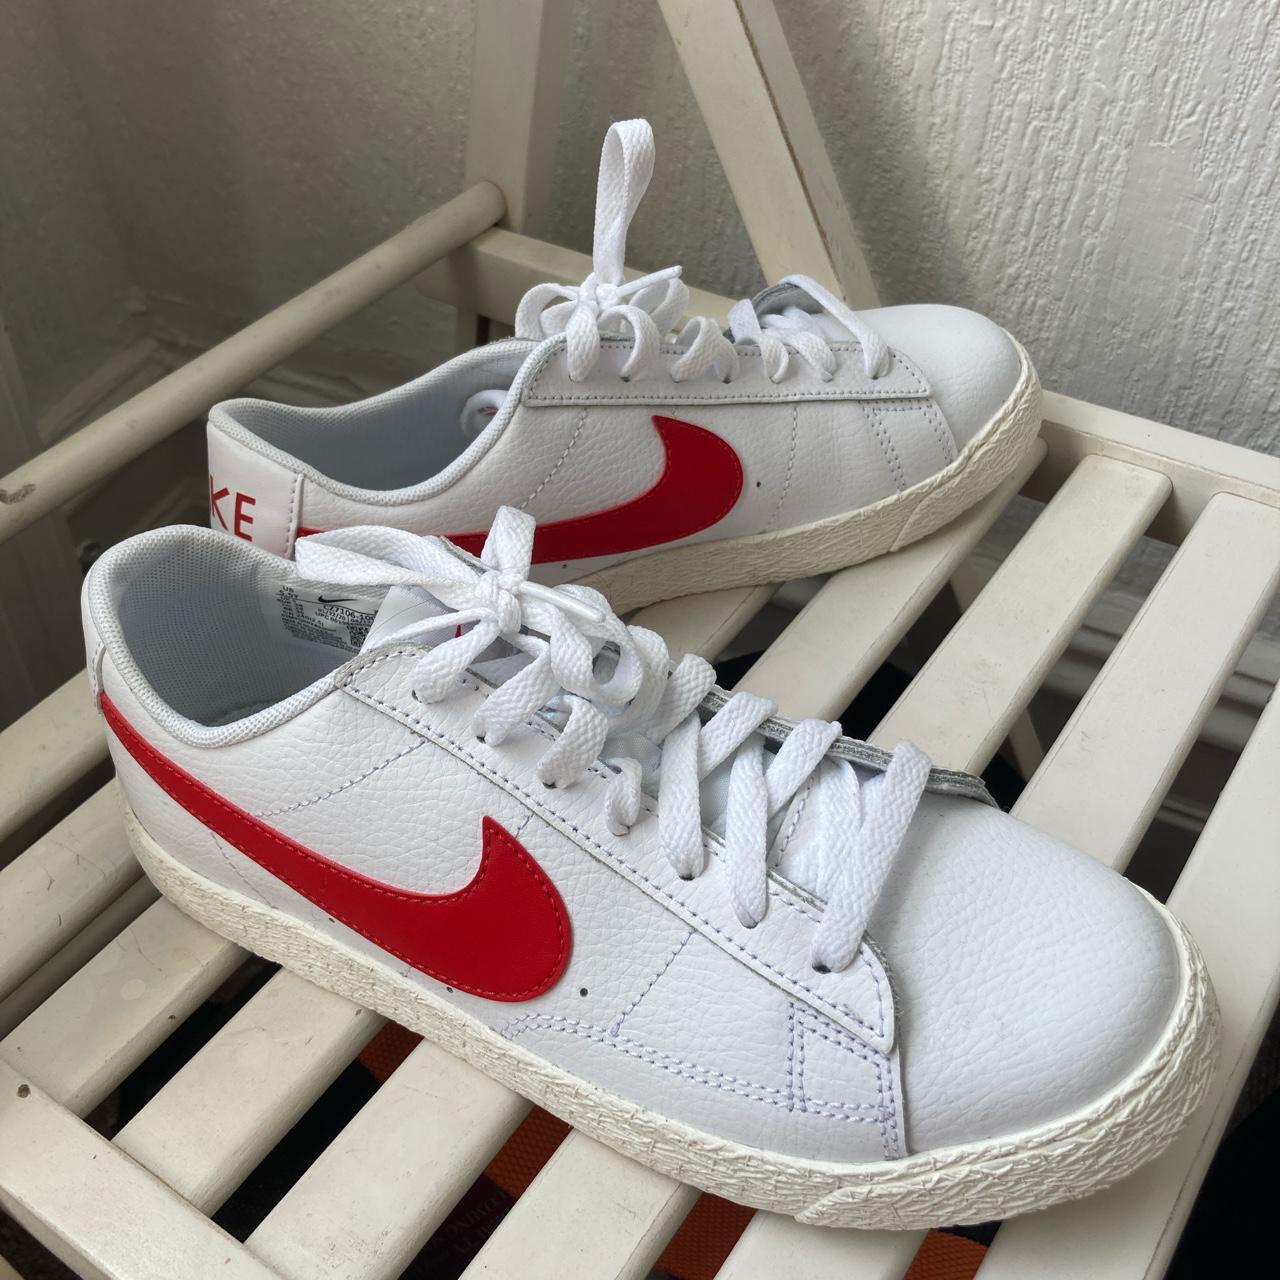 Nike Women's Red and White | Depop